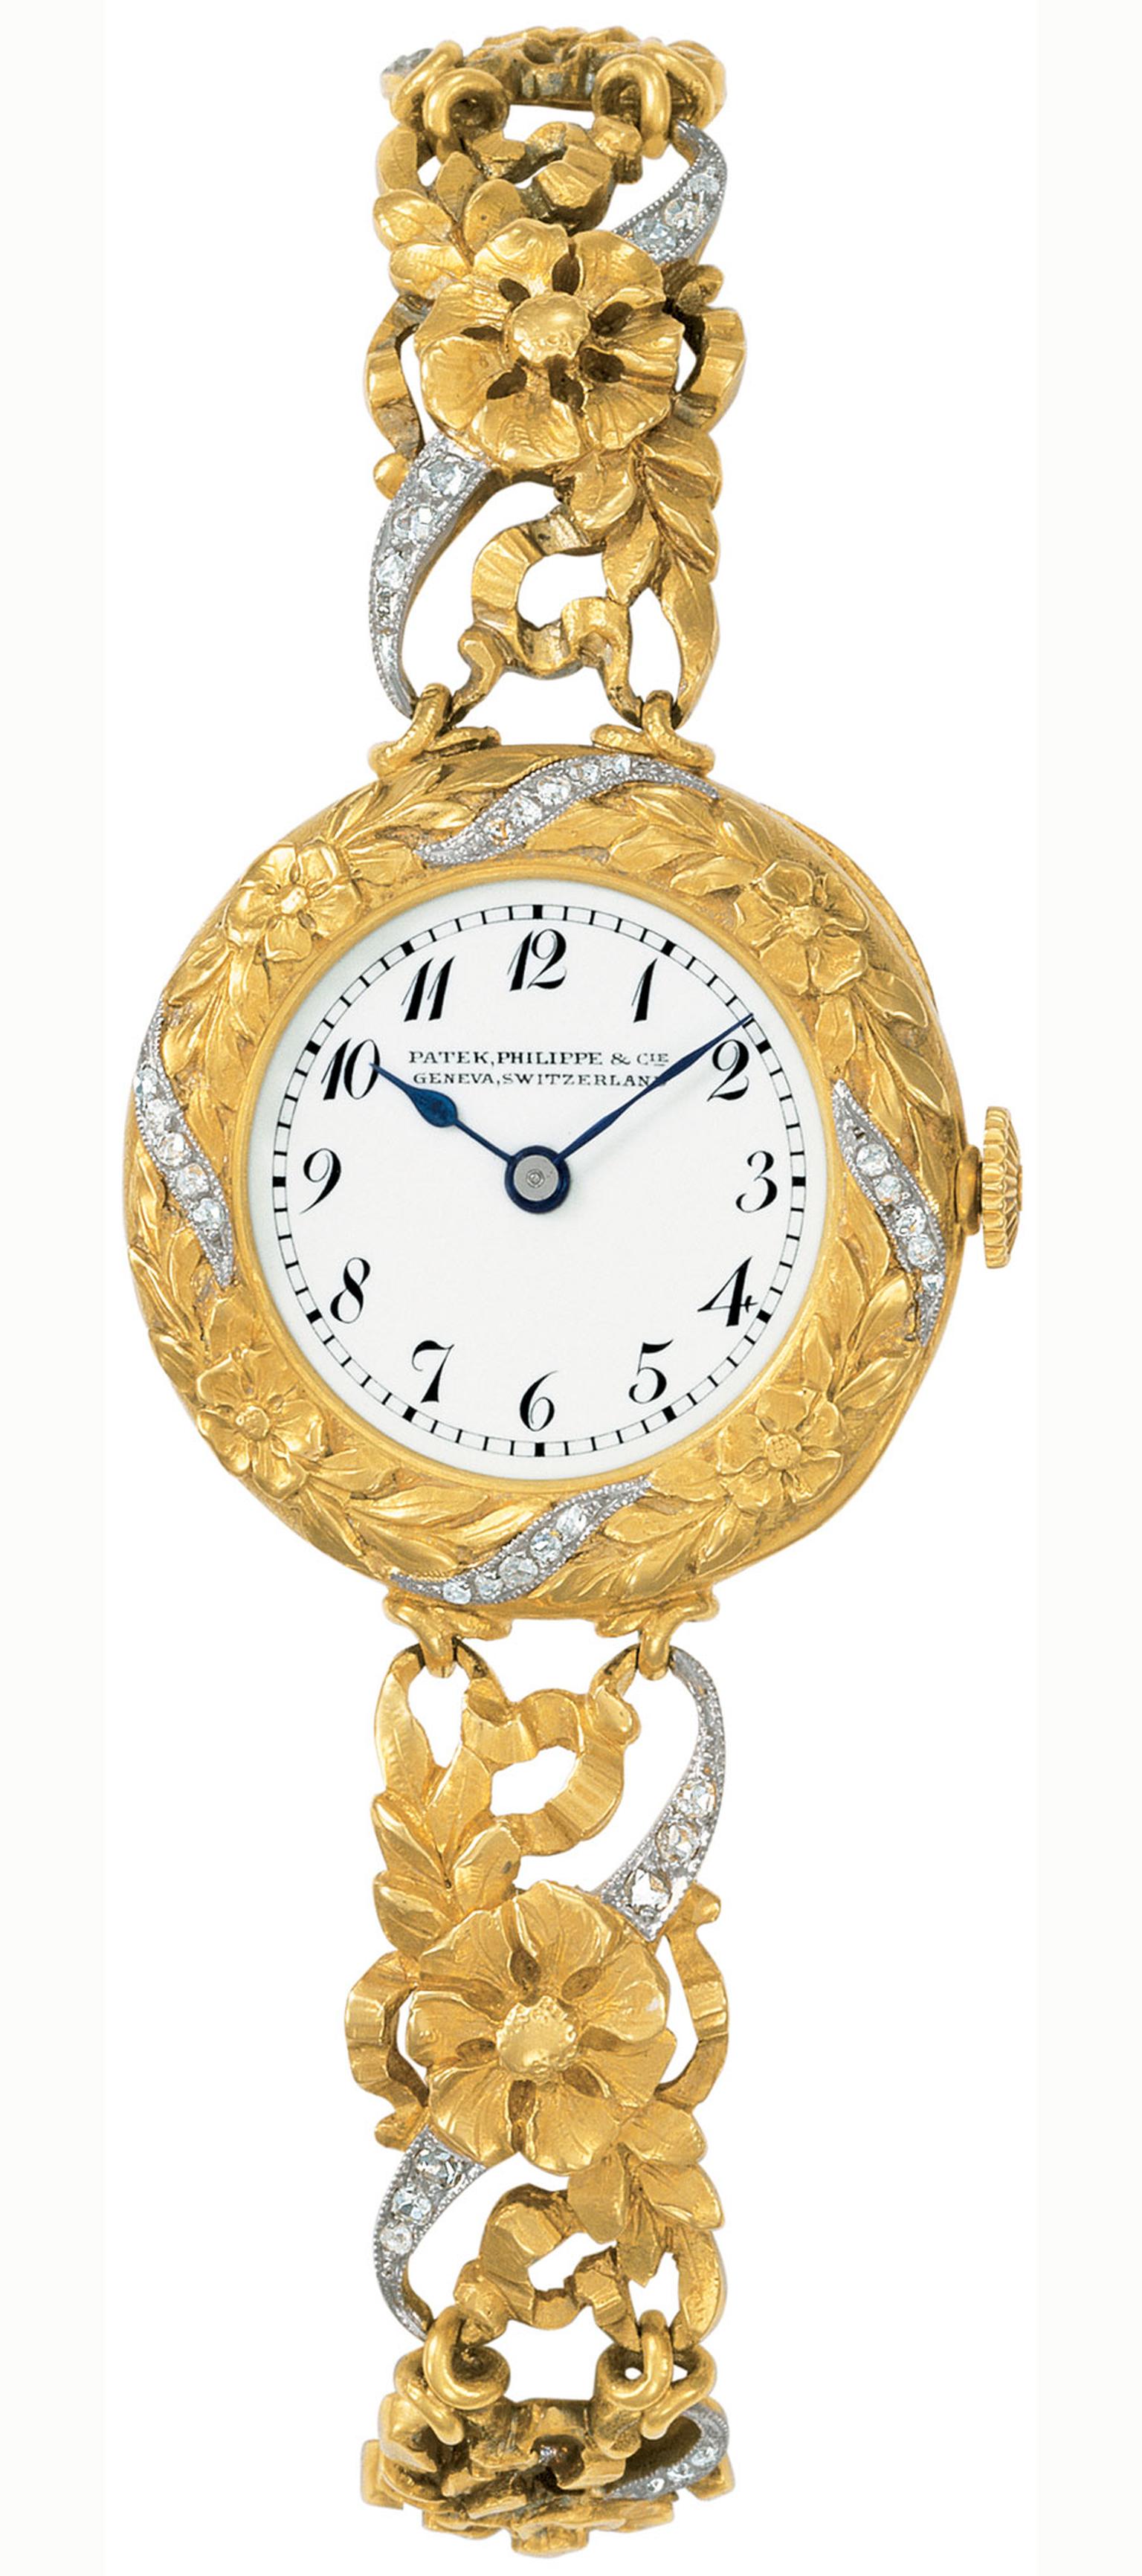 Patek-Philippe-P0283_a_200_collection-1910-15.jpg